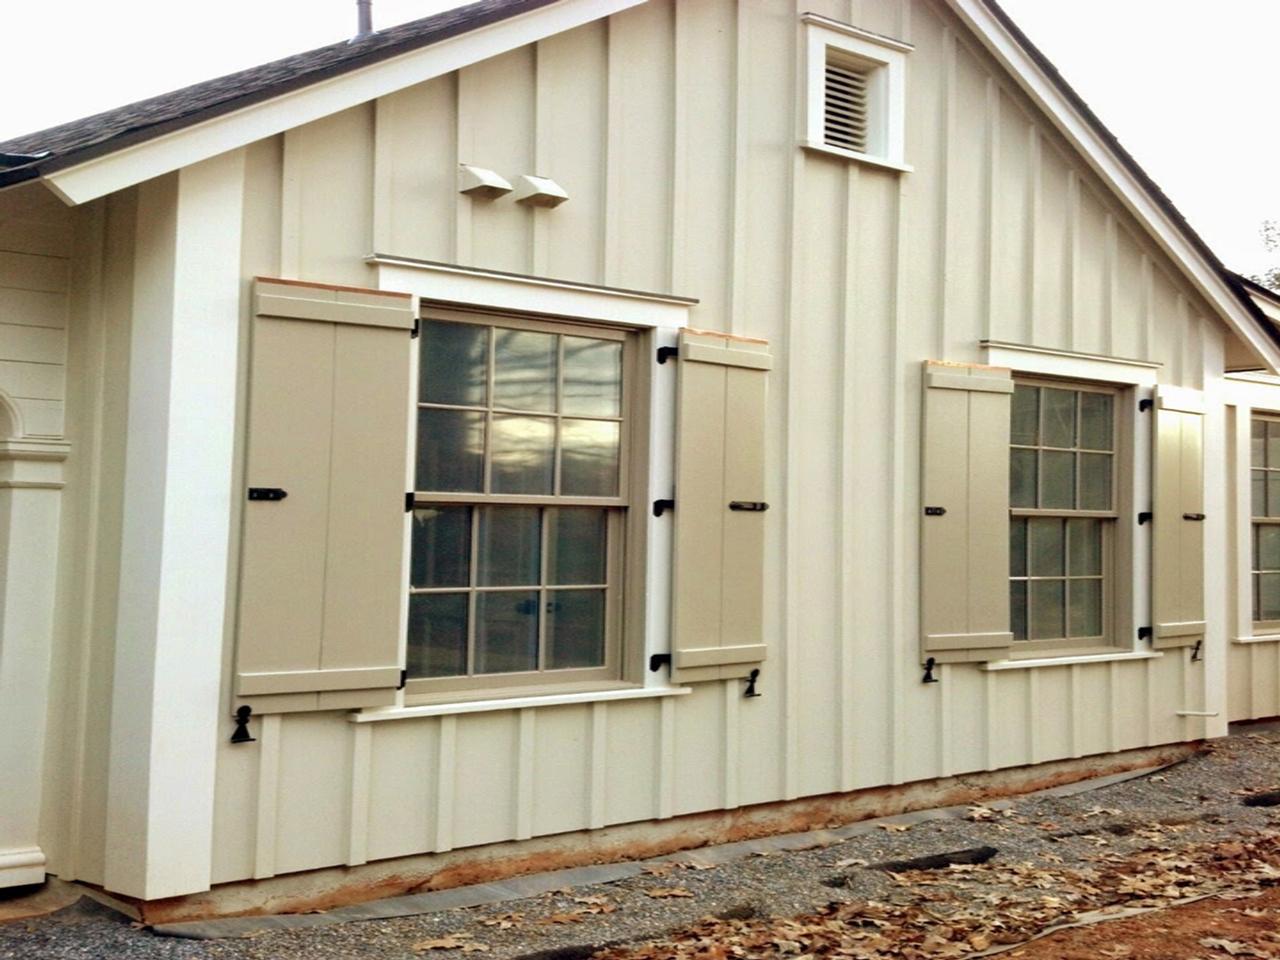 Operable board and batten shutters on house with vertical siding